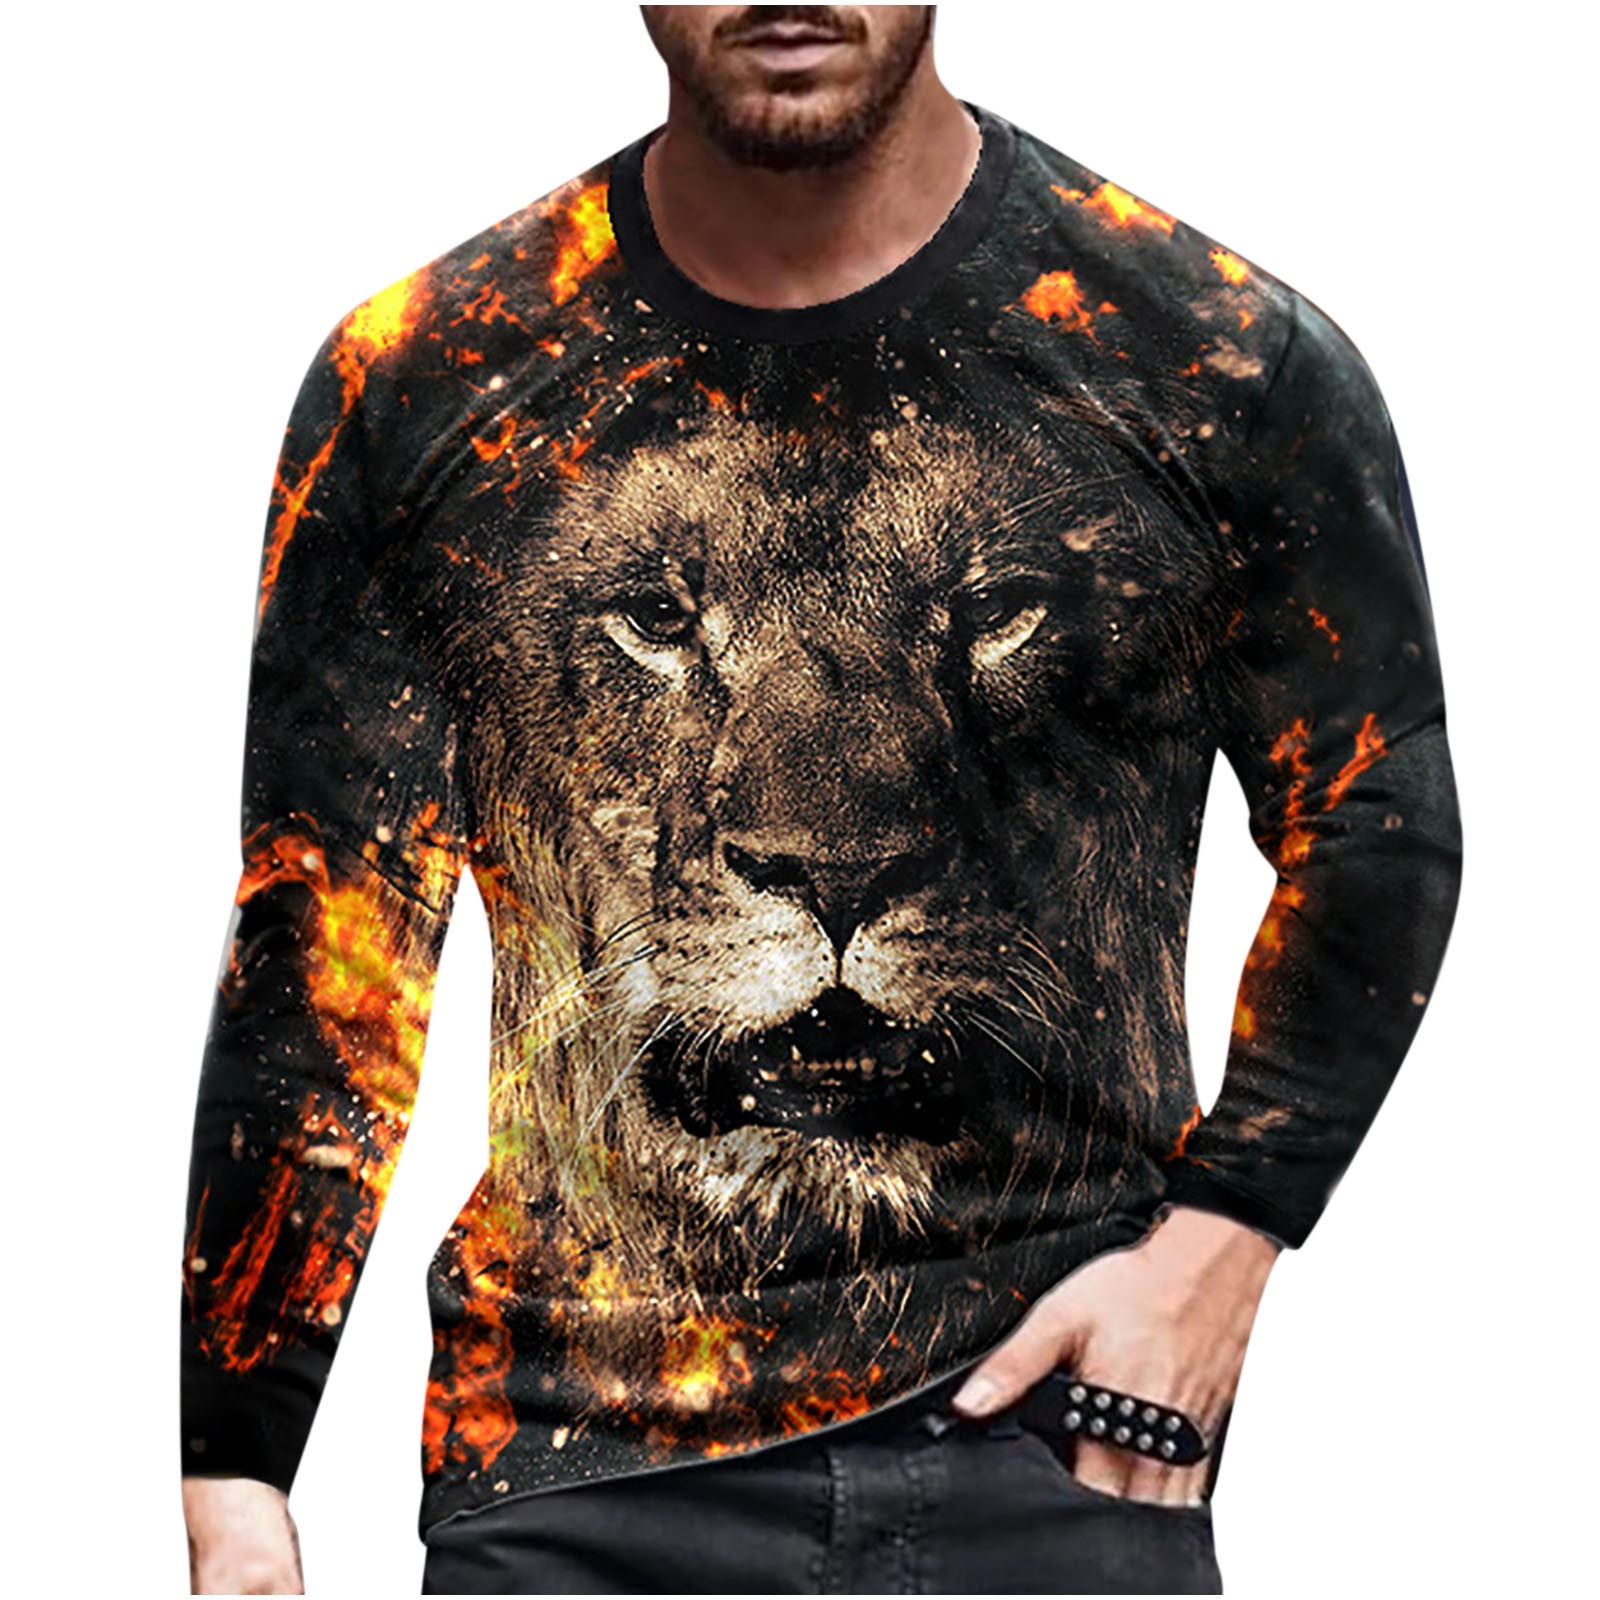 jsaierl Mens Tops Fashion 3D Lion Animal Printed Casual Long Sleeve T ...